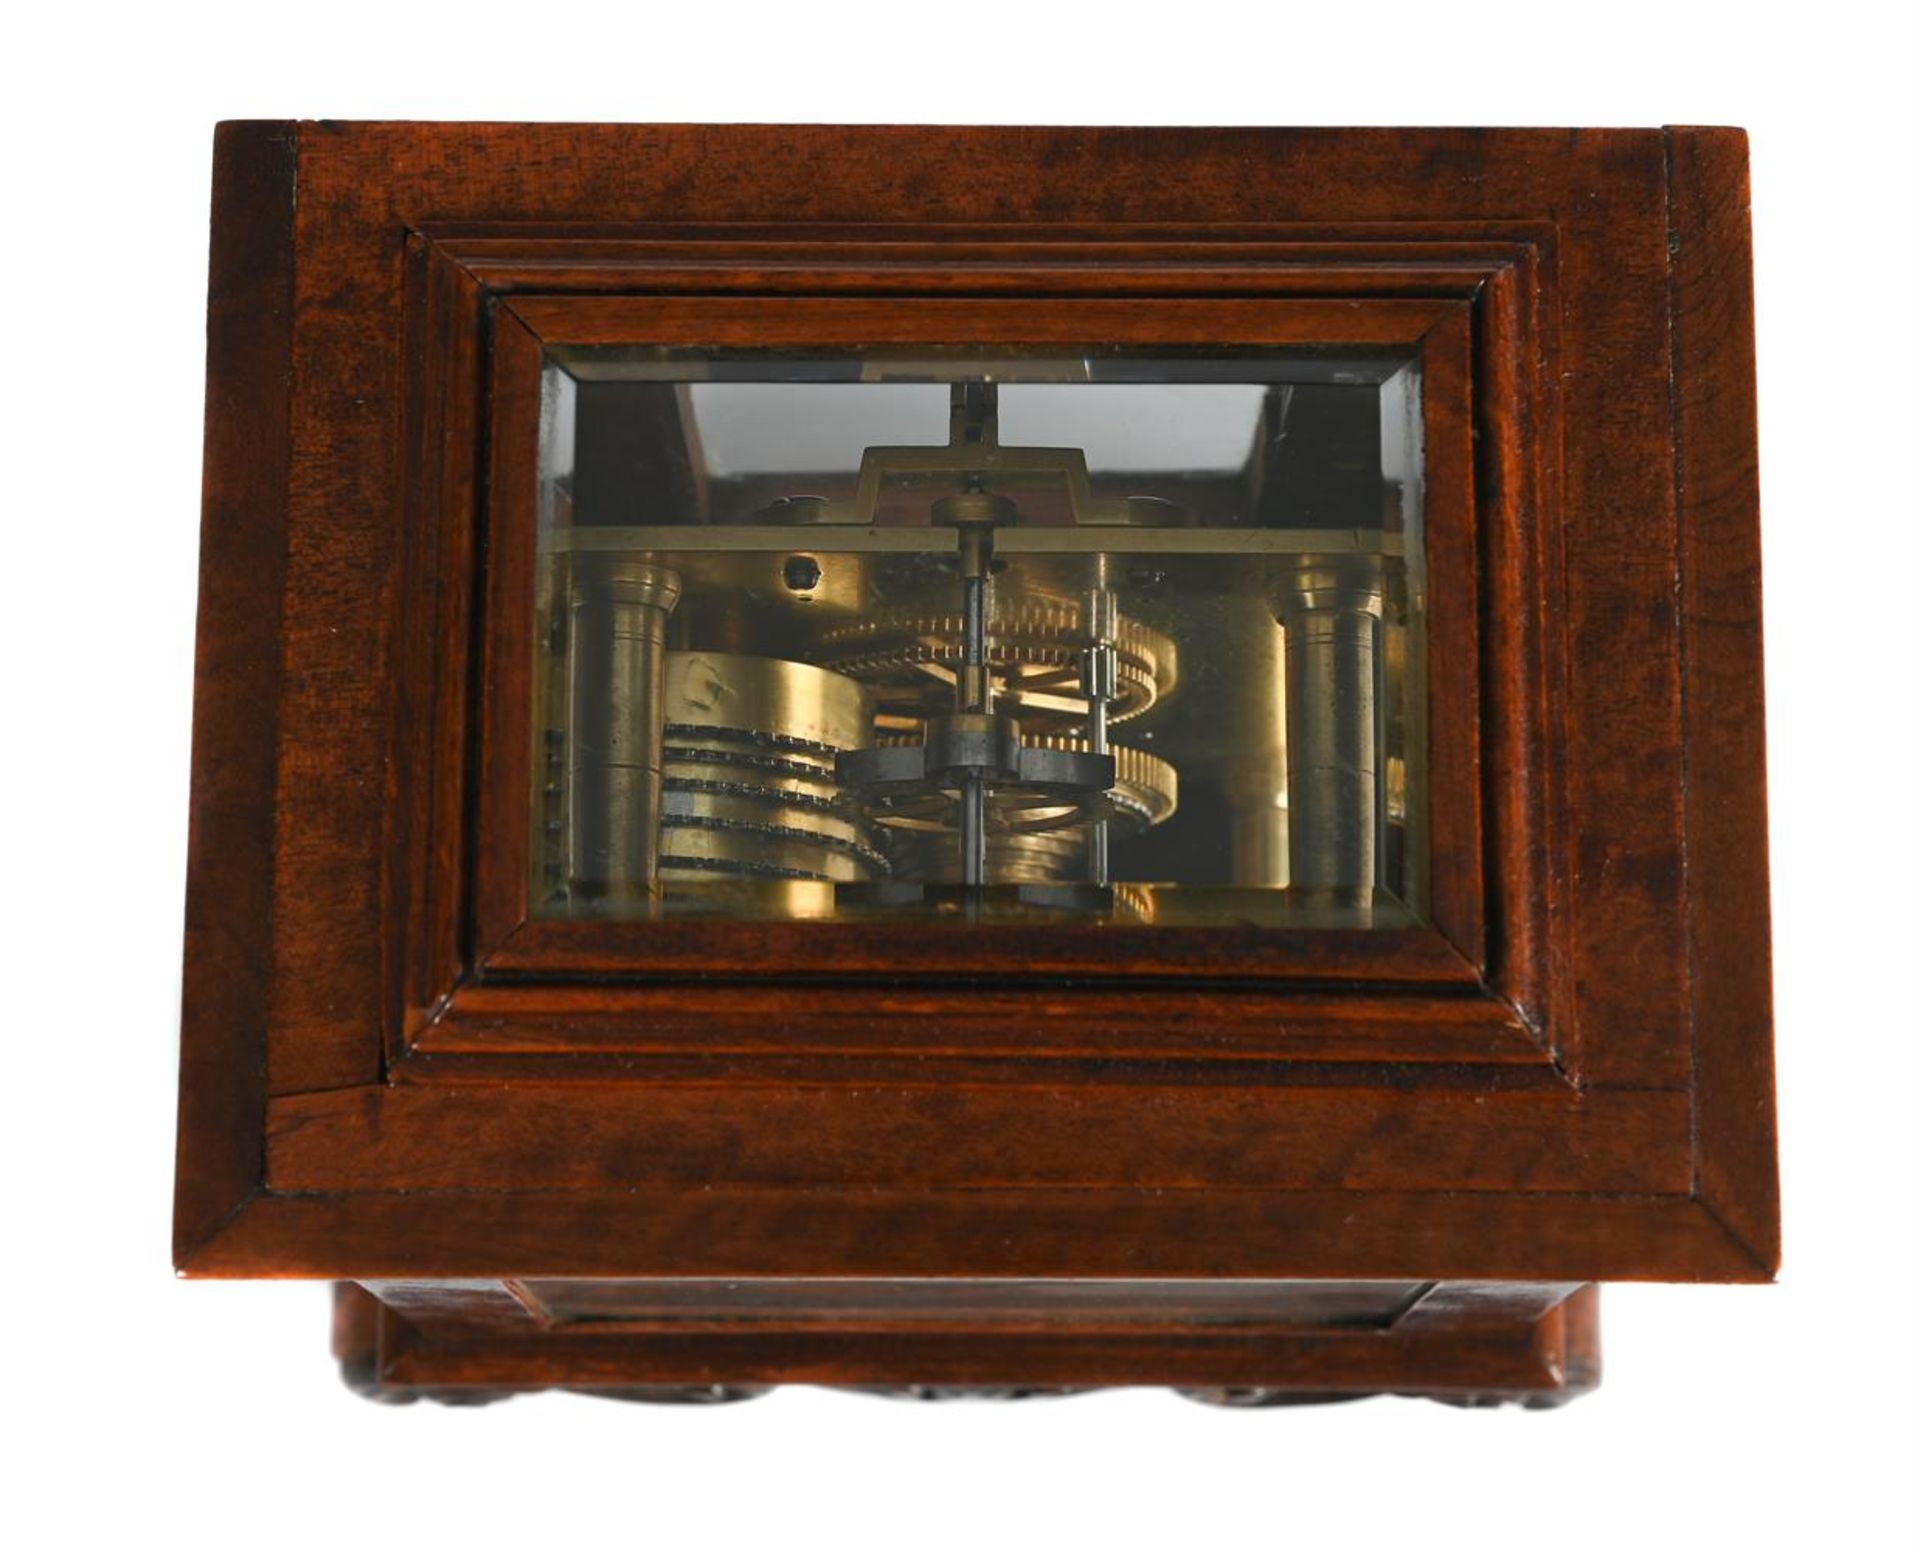 A VICTORIAN MAHOGANY SMALL FIVE GLASS MANTEL TIMEPIECE - Image 2 of 3